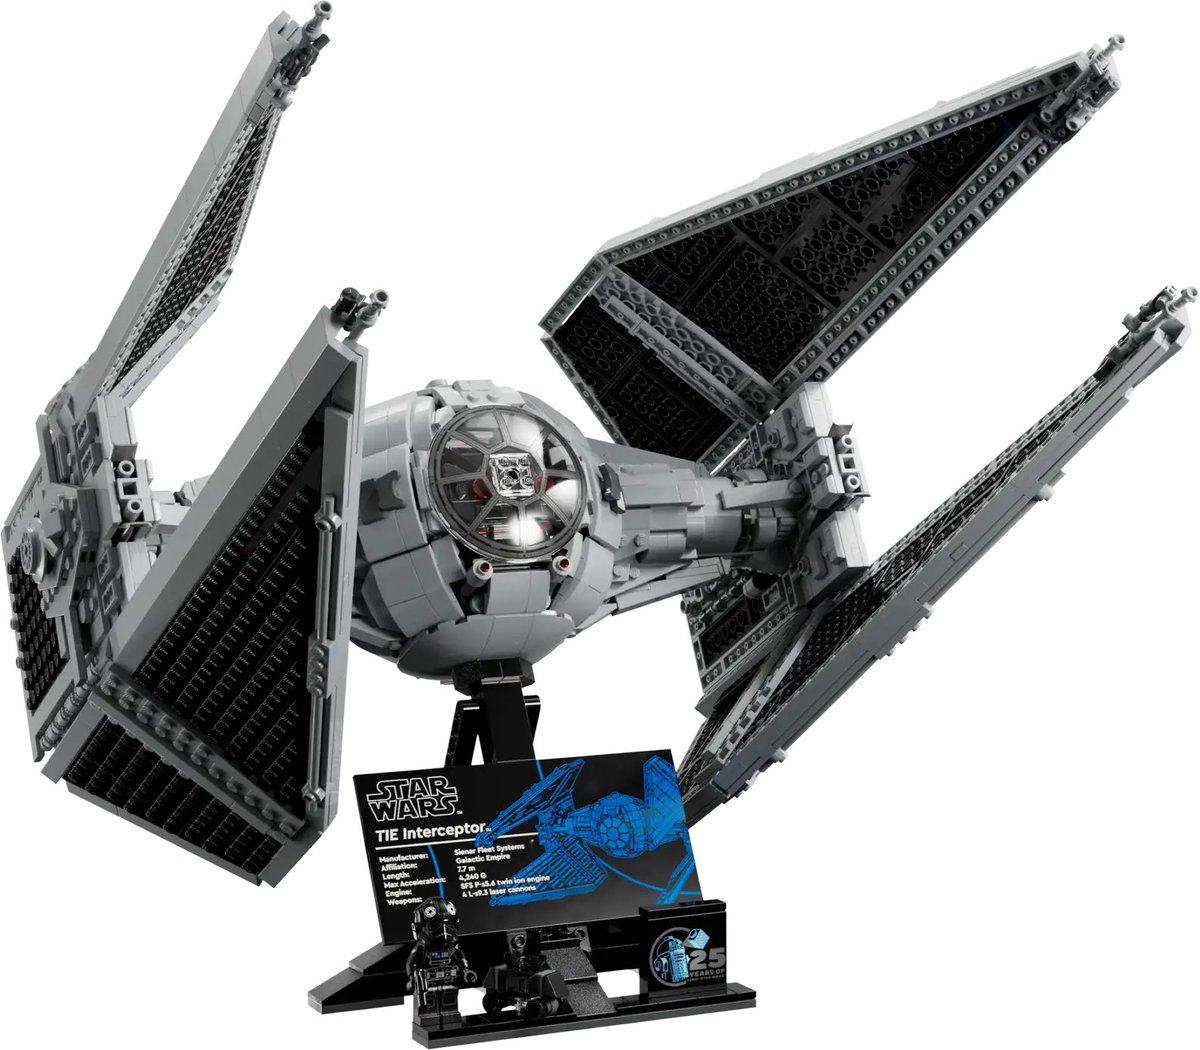 Just ordered the new #Lego ‘TIE Interceptor’ since it’s #StarWarsDay! Can't wait to put it together while blasting the Imperial March. May the Fourth be with you! 🚀 #StarWars #MayThe4thBeWithYou